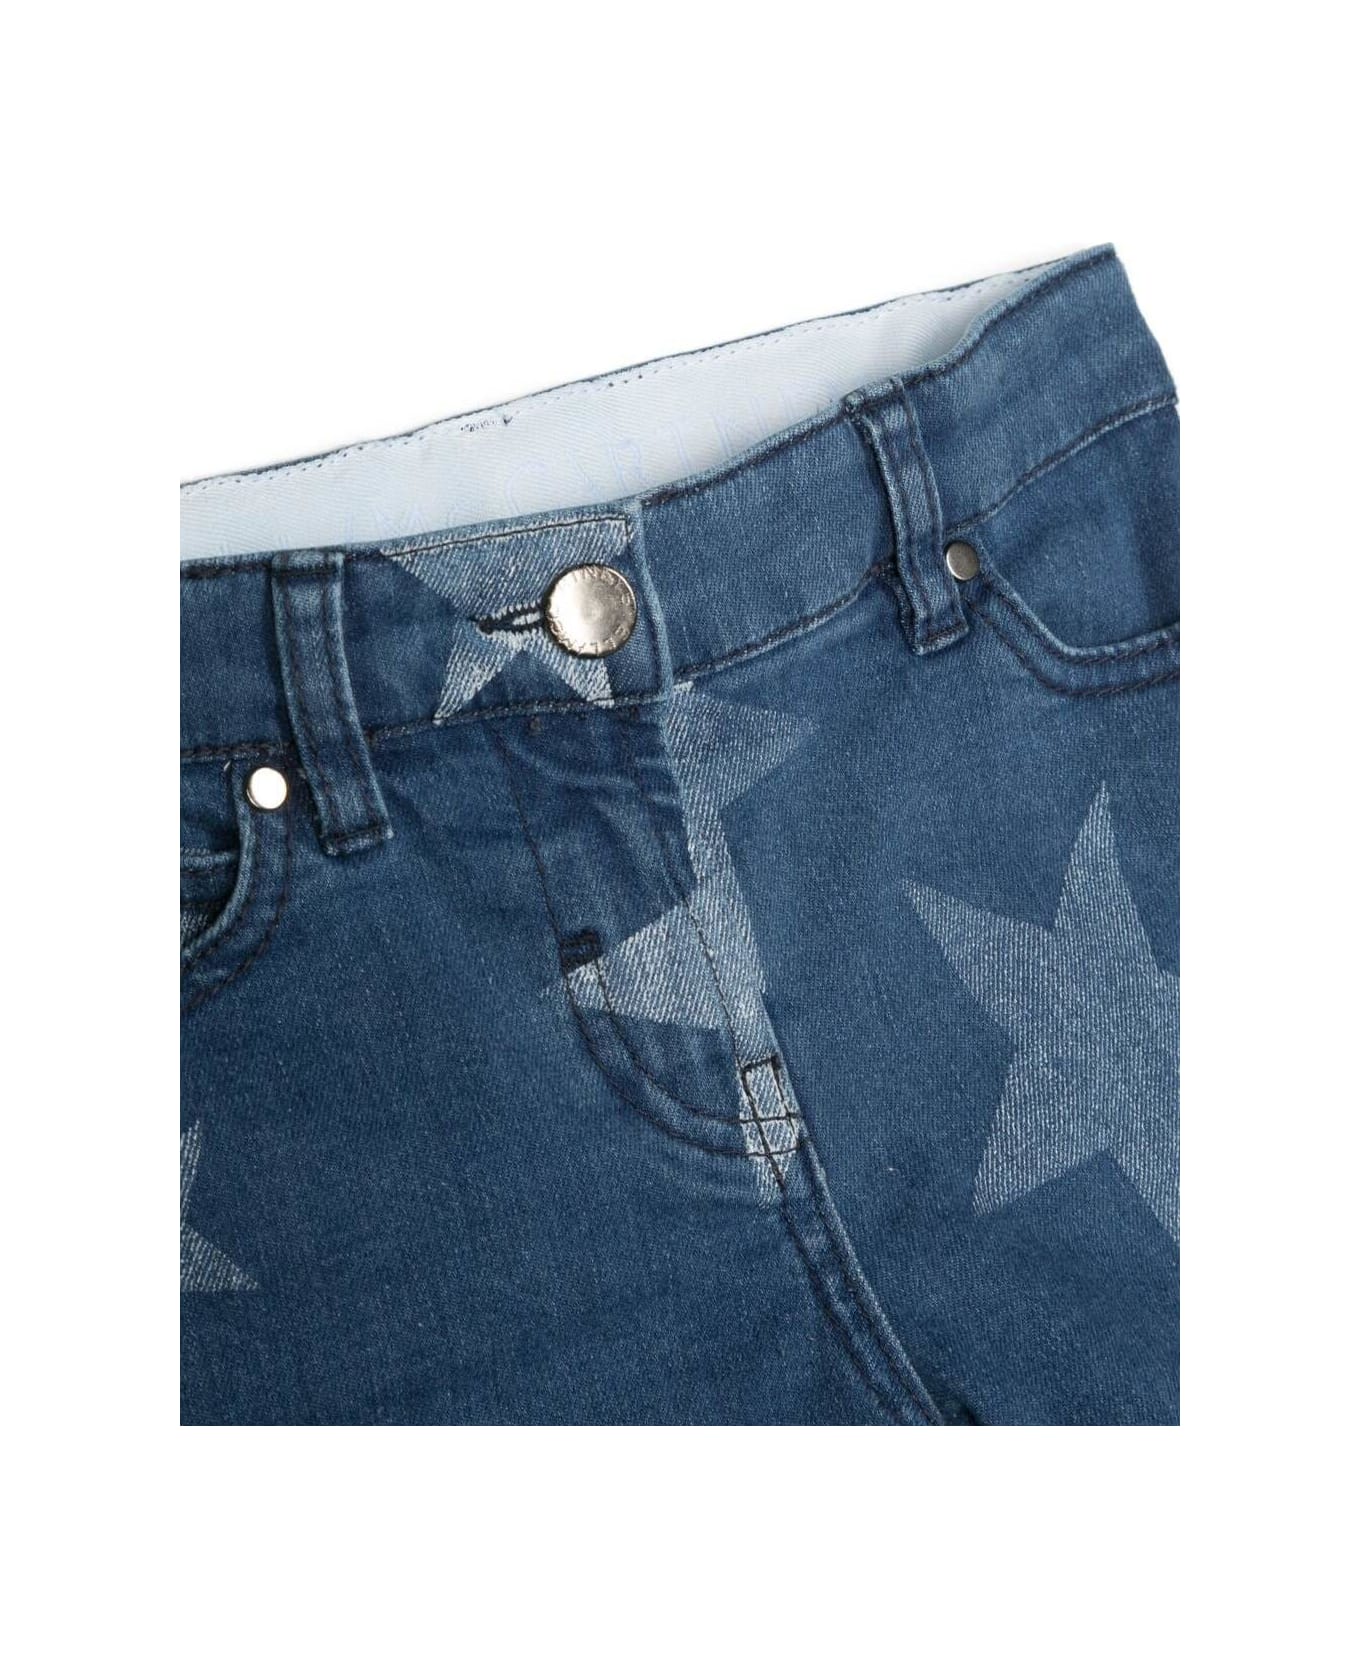 Stella McCartney Kids Denim Shorts With All-over Star-print In Blue Cotton Girl - Blue